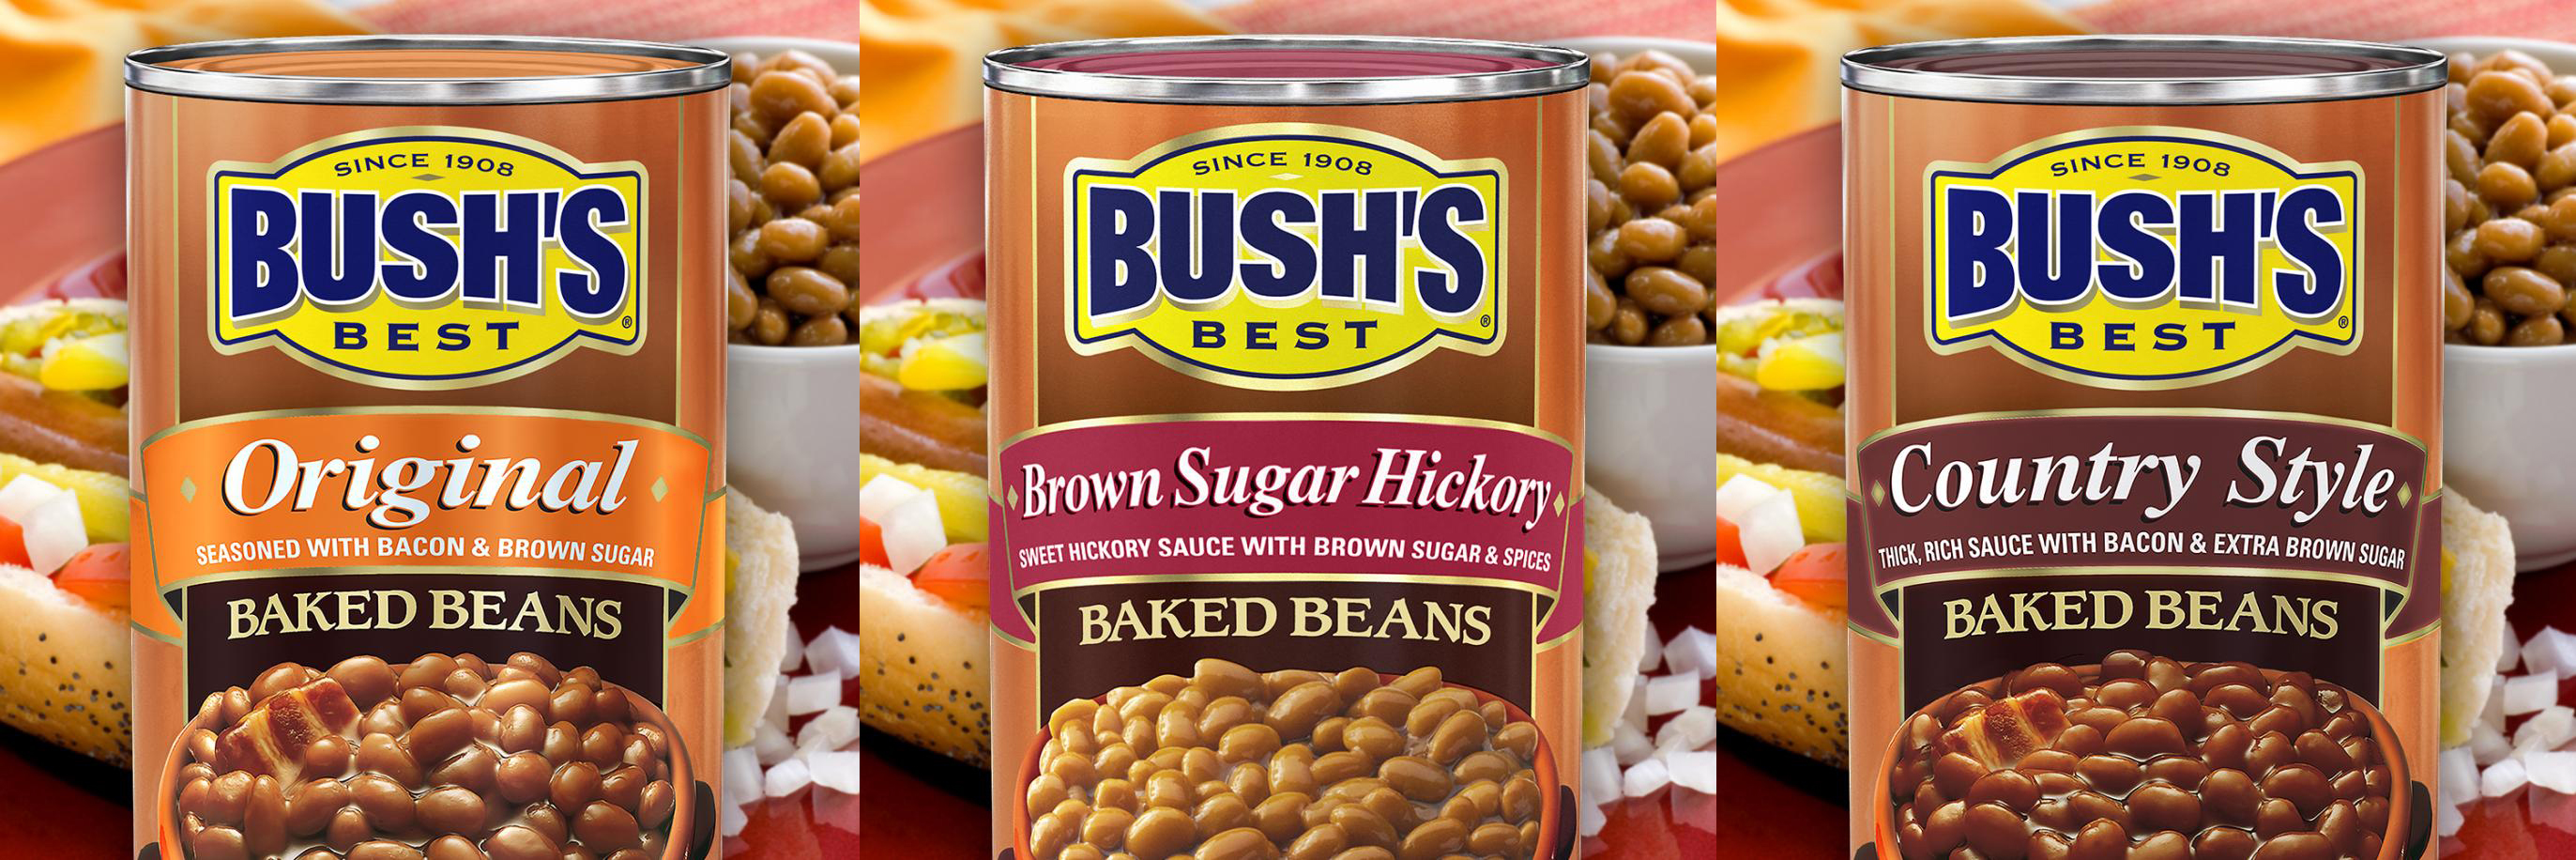 Bush’s Baked Beans Recalled Due To Defective Cans